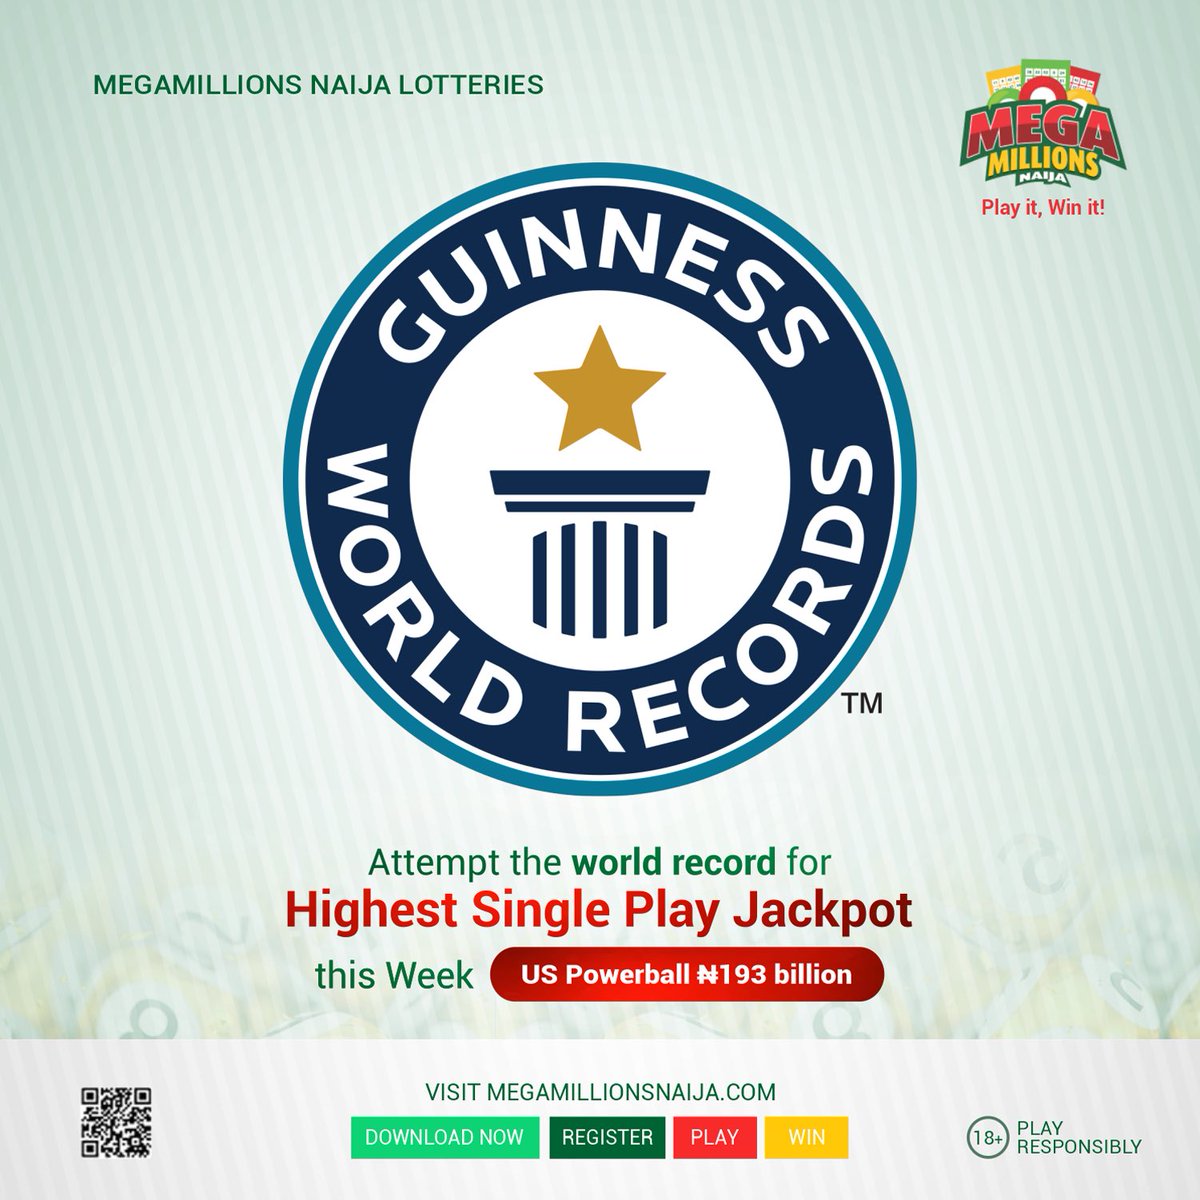 It's never too late to break a record! Win one of the biggest jackpots in the world today.
Click the link on our bio to get your tickets for the US Powerball draw
#onlinelotteries #megamillionsnaijalotteries #picsoftheday  #fy